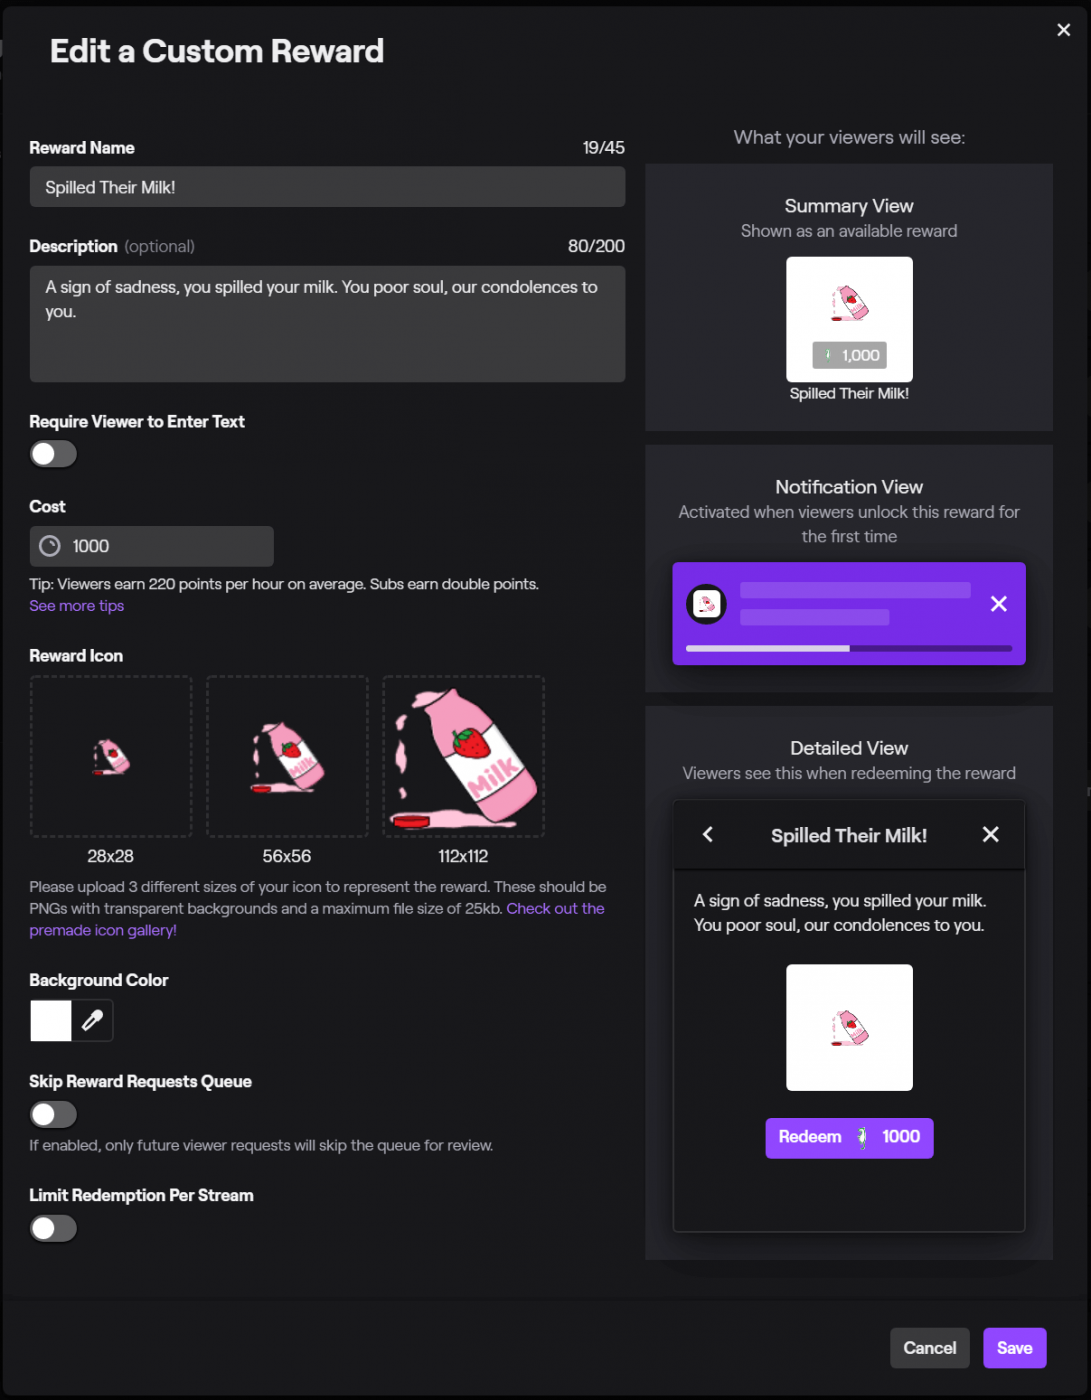 Twitch Channel Point Ideas - Keep Chat Active with 29 Fun Rewards